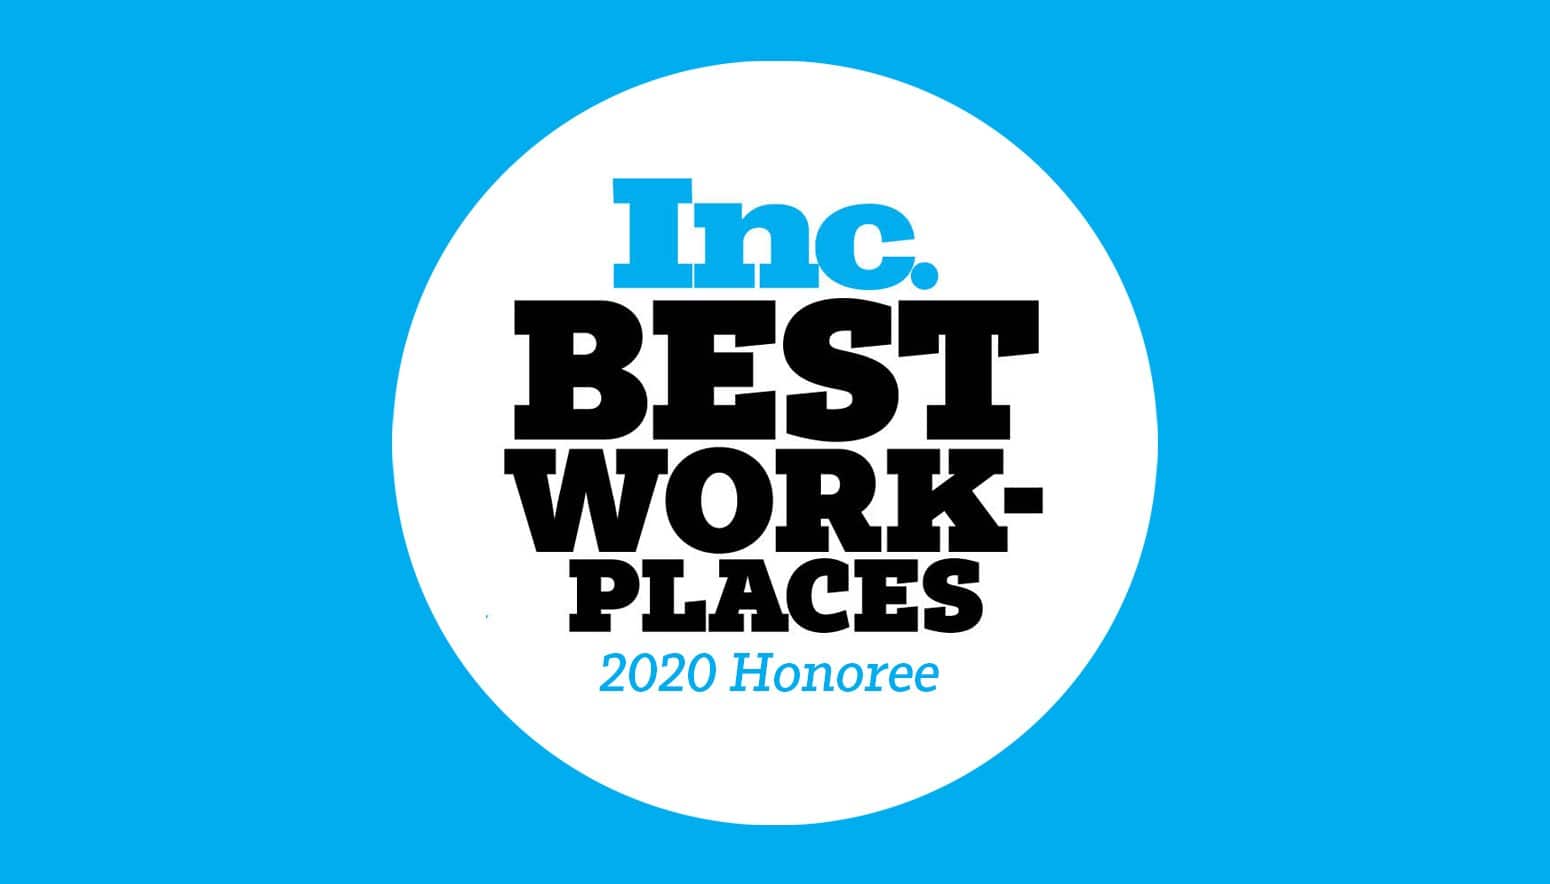 Inc. magazine reveals stoneridge on annual list of best workplaces for 2020